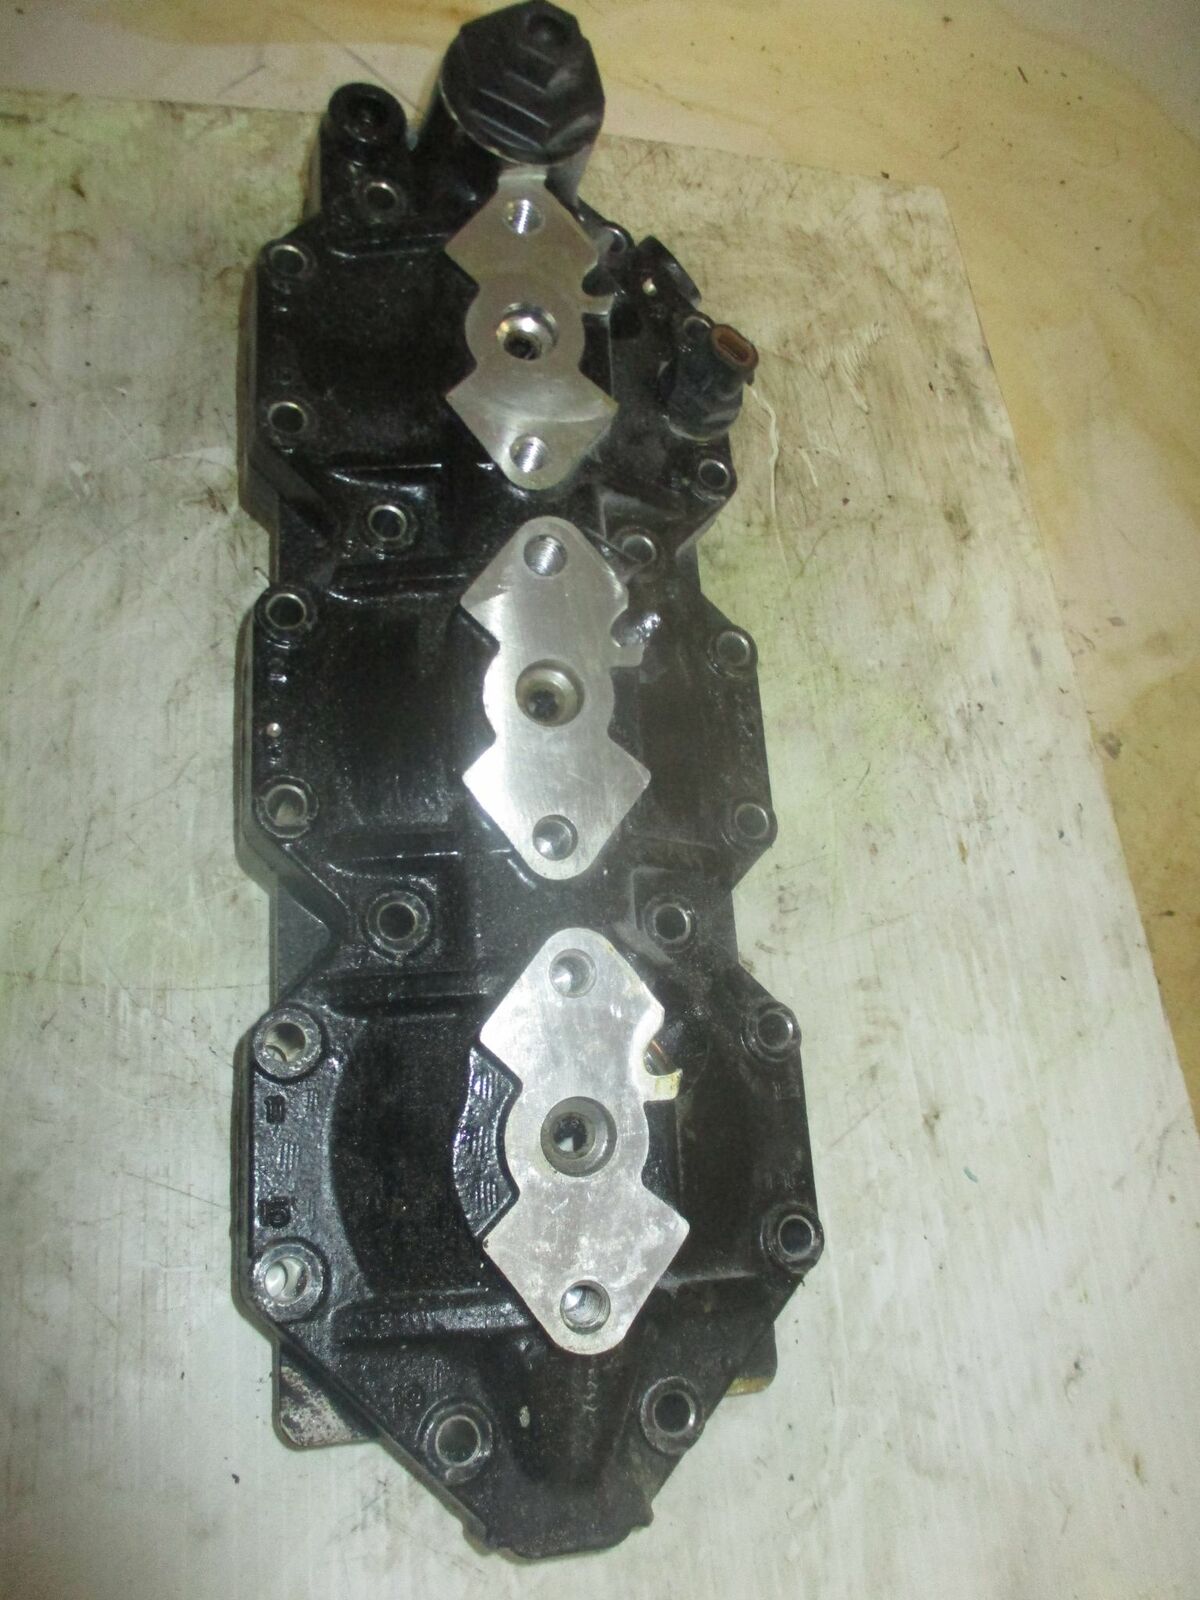 Evinrude ETEC 175hp outboard starboard cylinder head (352179)